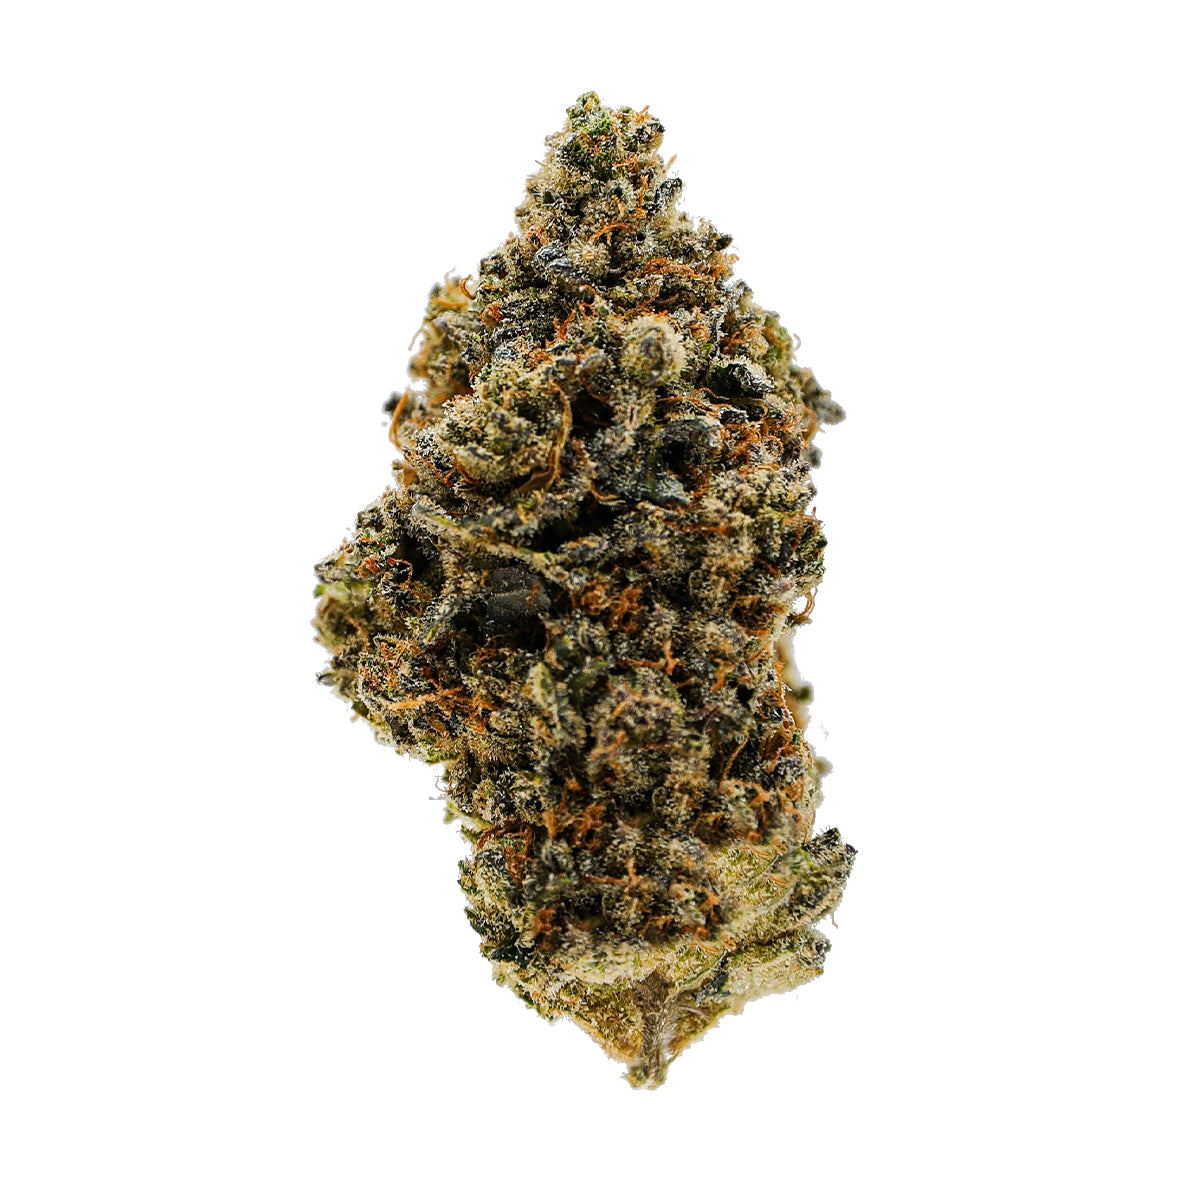 Donnie Burger THCa Indica Premium Hemp Flower - This potent indica dominant variety has dark green and purple nugs with an earthy gasy nose. The most abundant terpene in Donny Burger is caryophyllene, followed by limonene and myrcene.